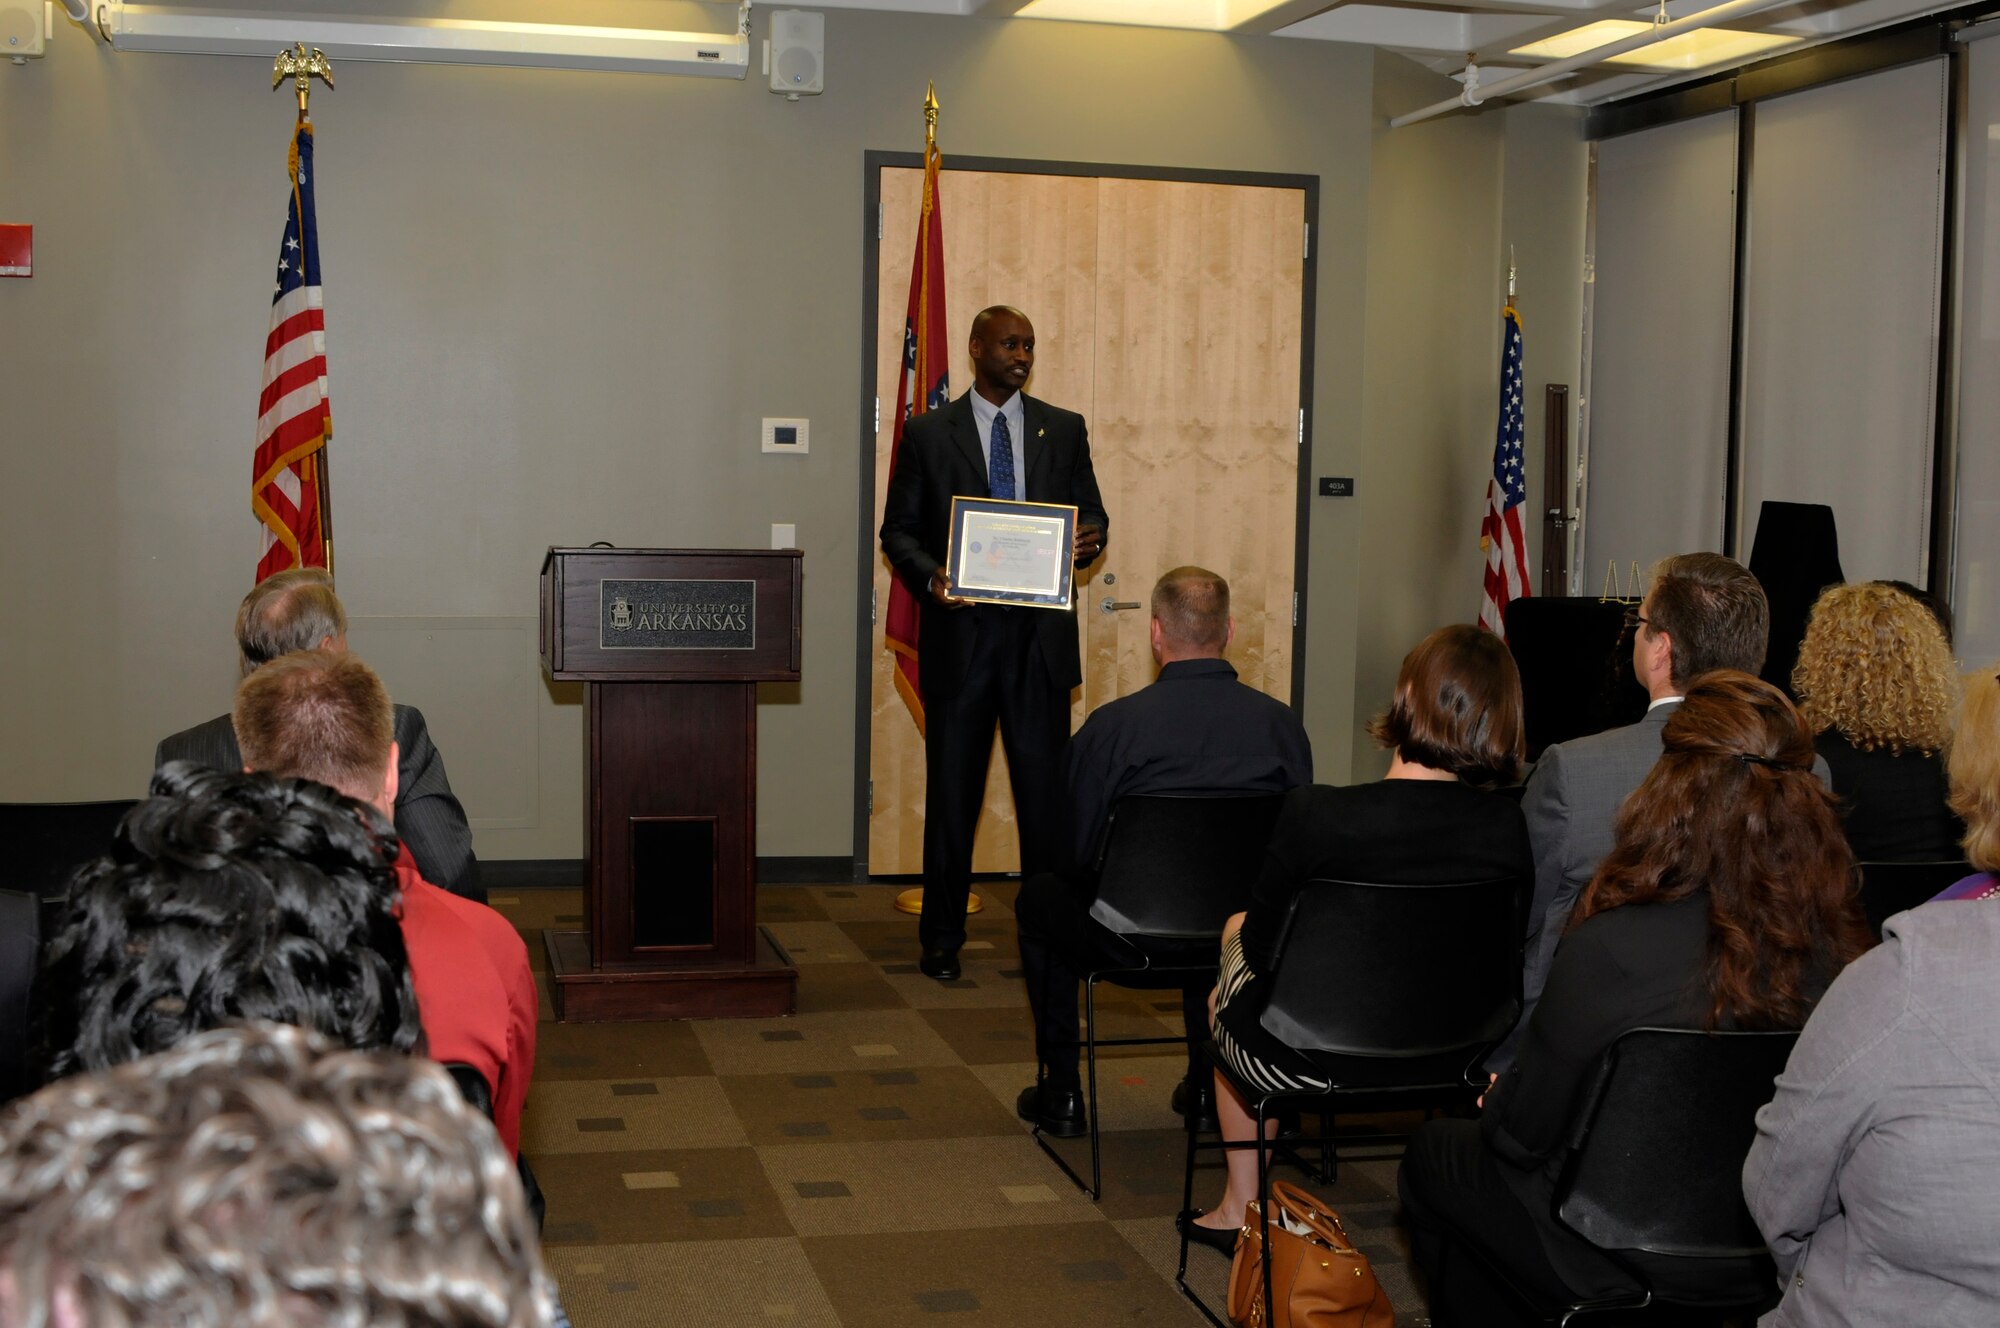 Dr. Charles F. Robinson, University of Arkansas (UA) vice chancellor for diversity and communication, addresses a gathering during an Employer Support of the Guard and Reserve Patriot Award presentation held at the UA Center for Multicultural and Diversity Education in Fayetteville, Arkansas, Sept. 19, 2014. Maj. Danielle Wood, 188th Wing Equal Opportunity chief, recognized the UA, Robinson and Dr. G. David Gearhart, UA chancellor, for their support of her Air National Guard career during the event. Dr. Wood is also the UA Office of Equal Opportunity & Compliance director. (U.S. Air National Guard photo by Maj. Heath Allen/Released)  